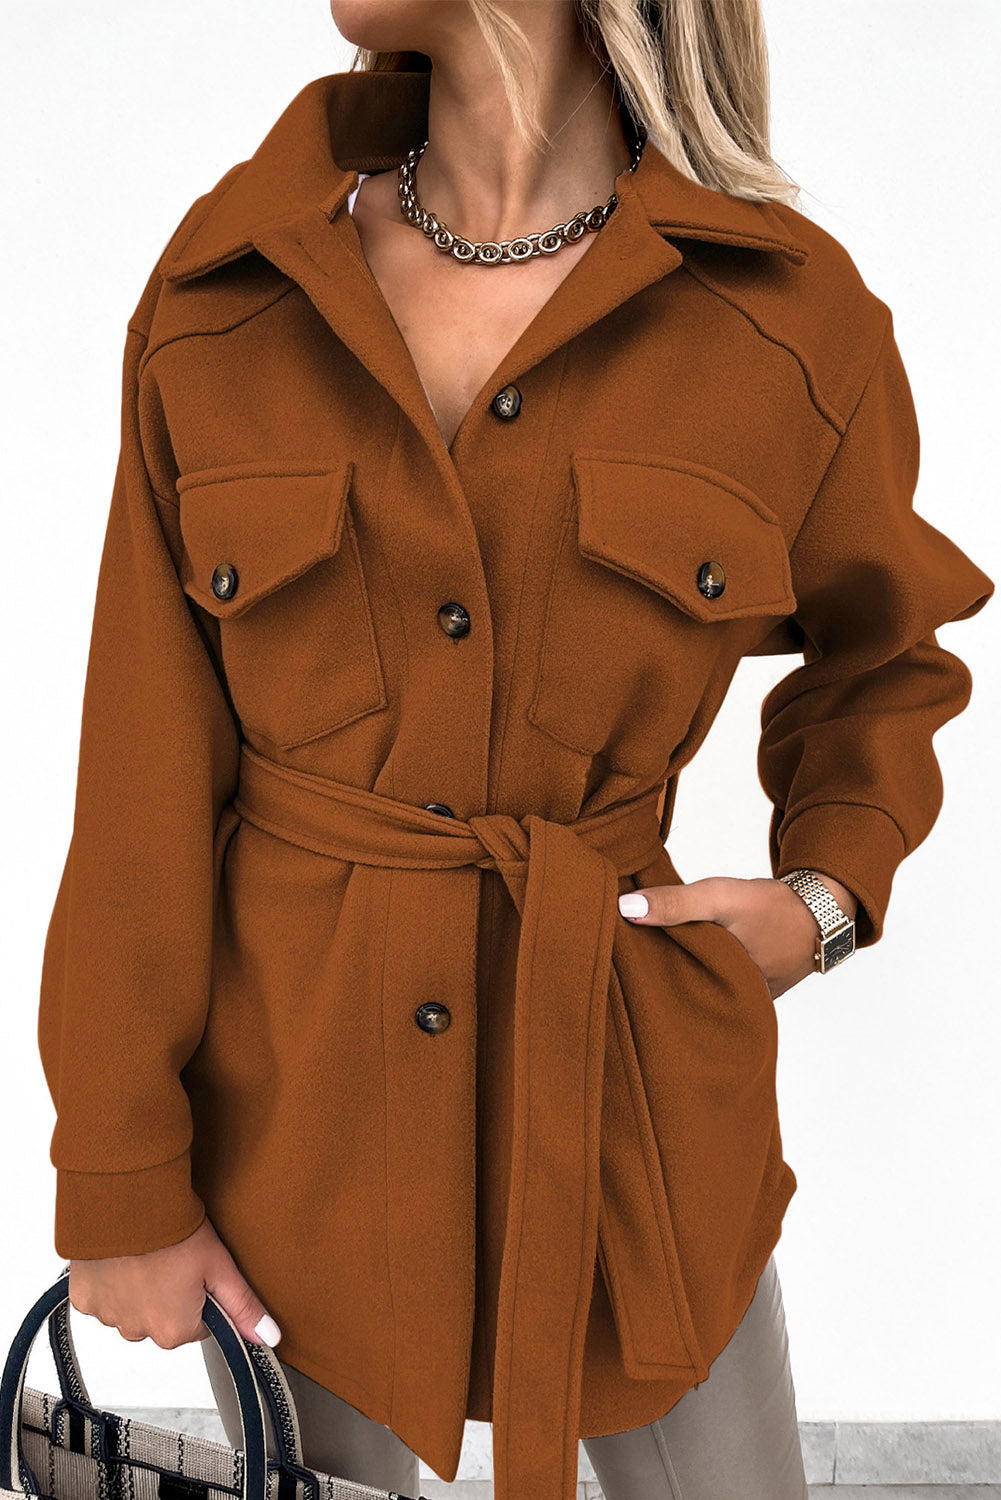 Brown Women's Lapel Button Down Coat Winter Belted Coat with Pockets LC8511359-17